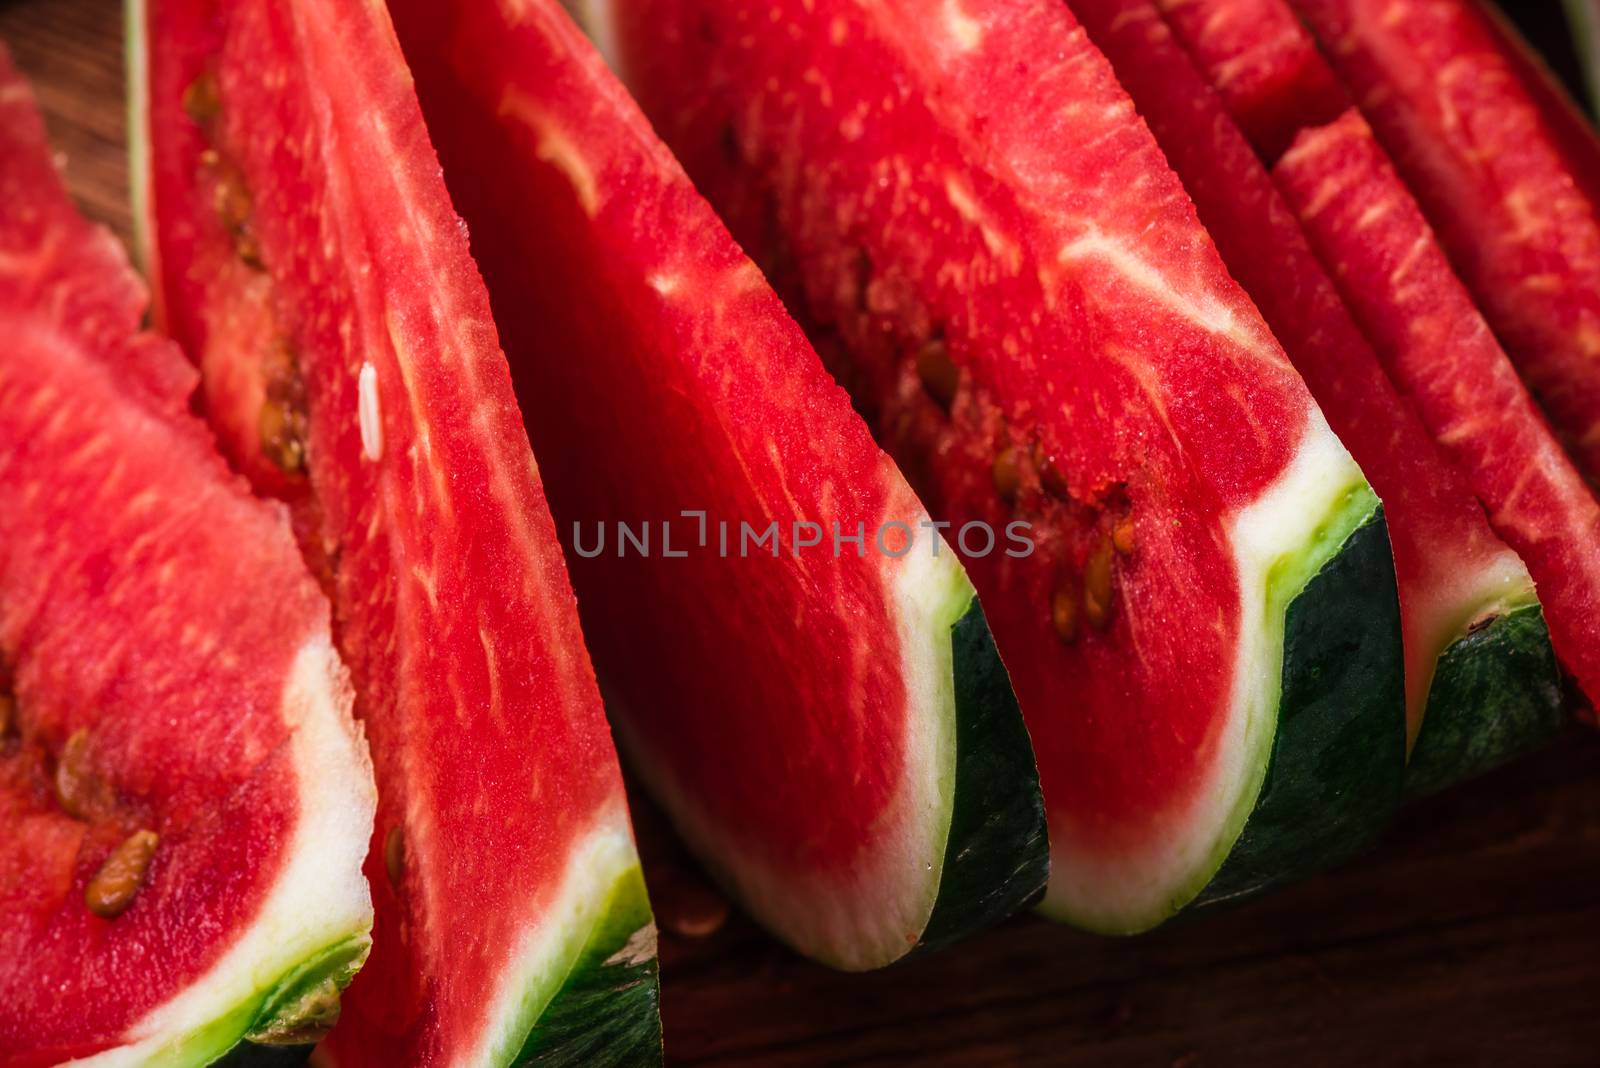 Juicy watermelon slices lying on wooden surface by Seva_blsv